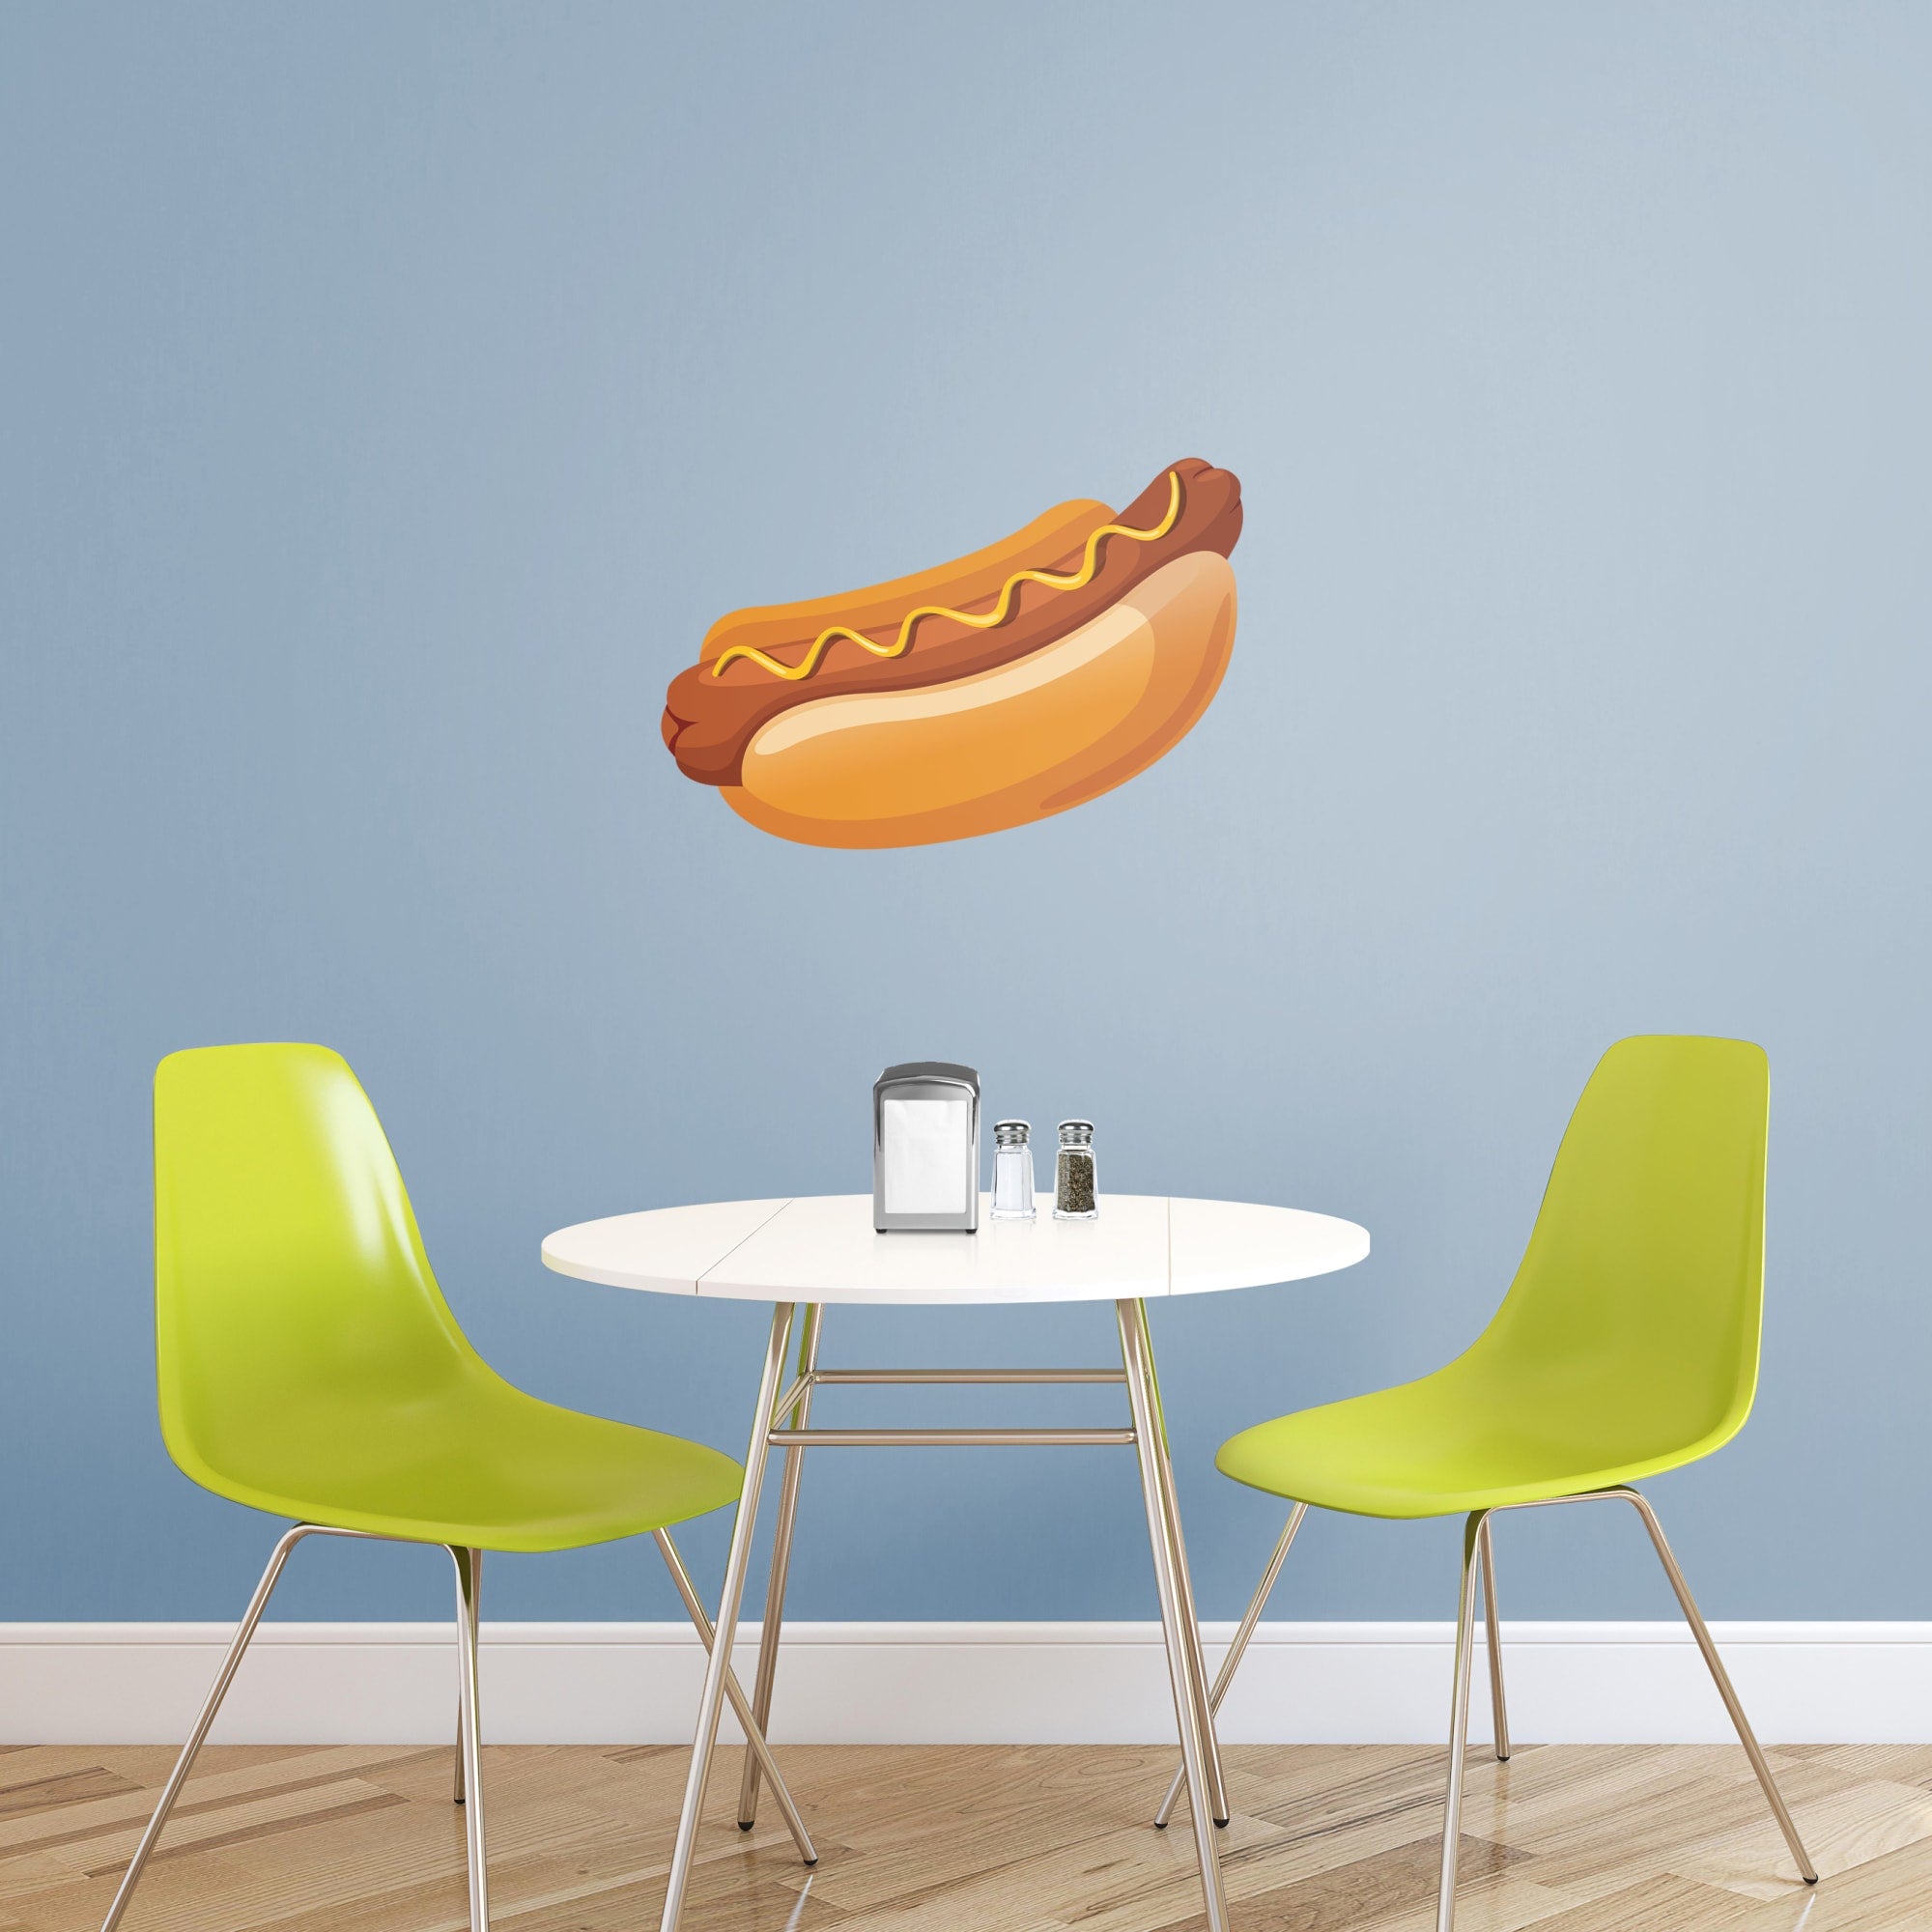 Hot Dog: Illustrated - Removable Vinyl Decal XL by Fathead